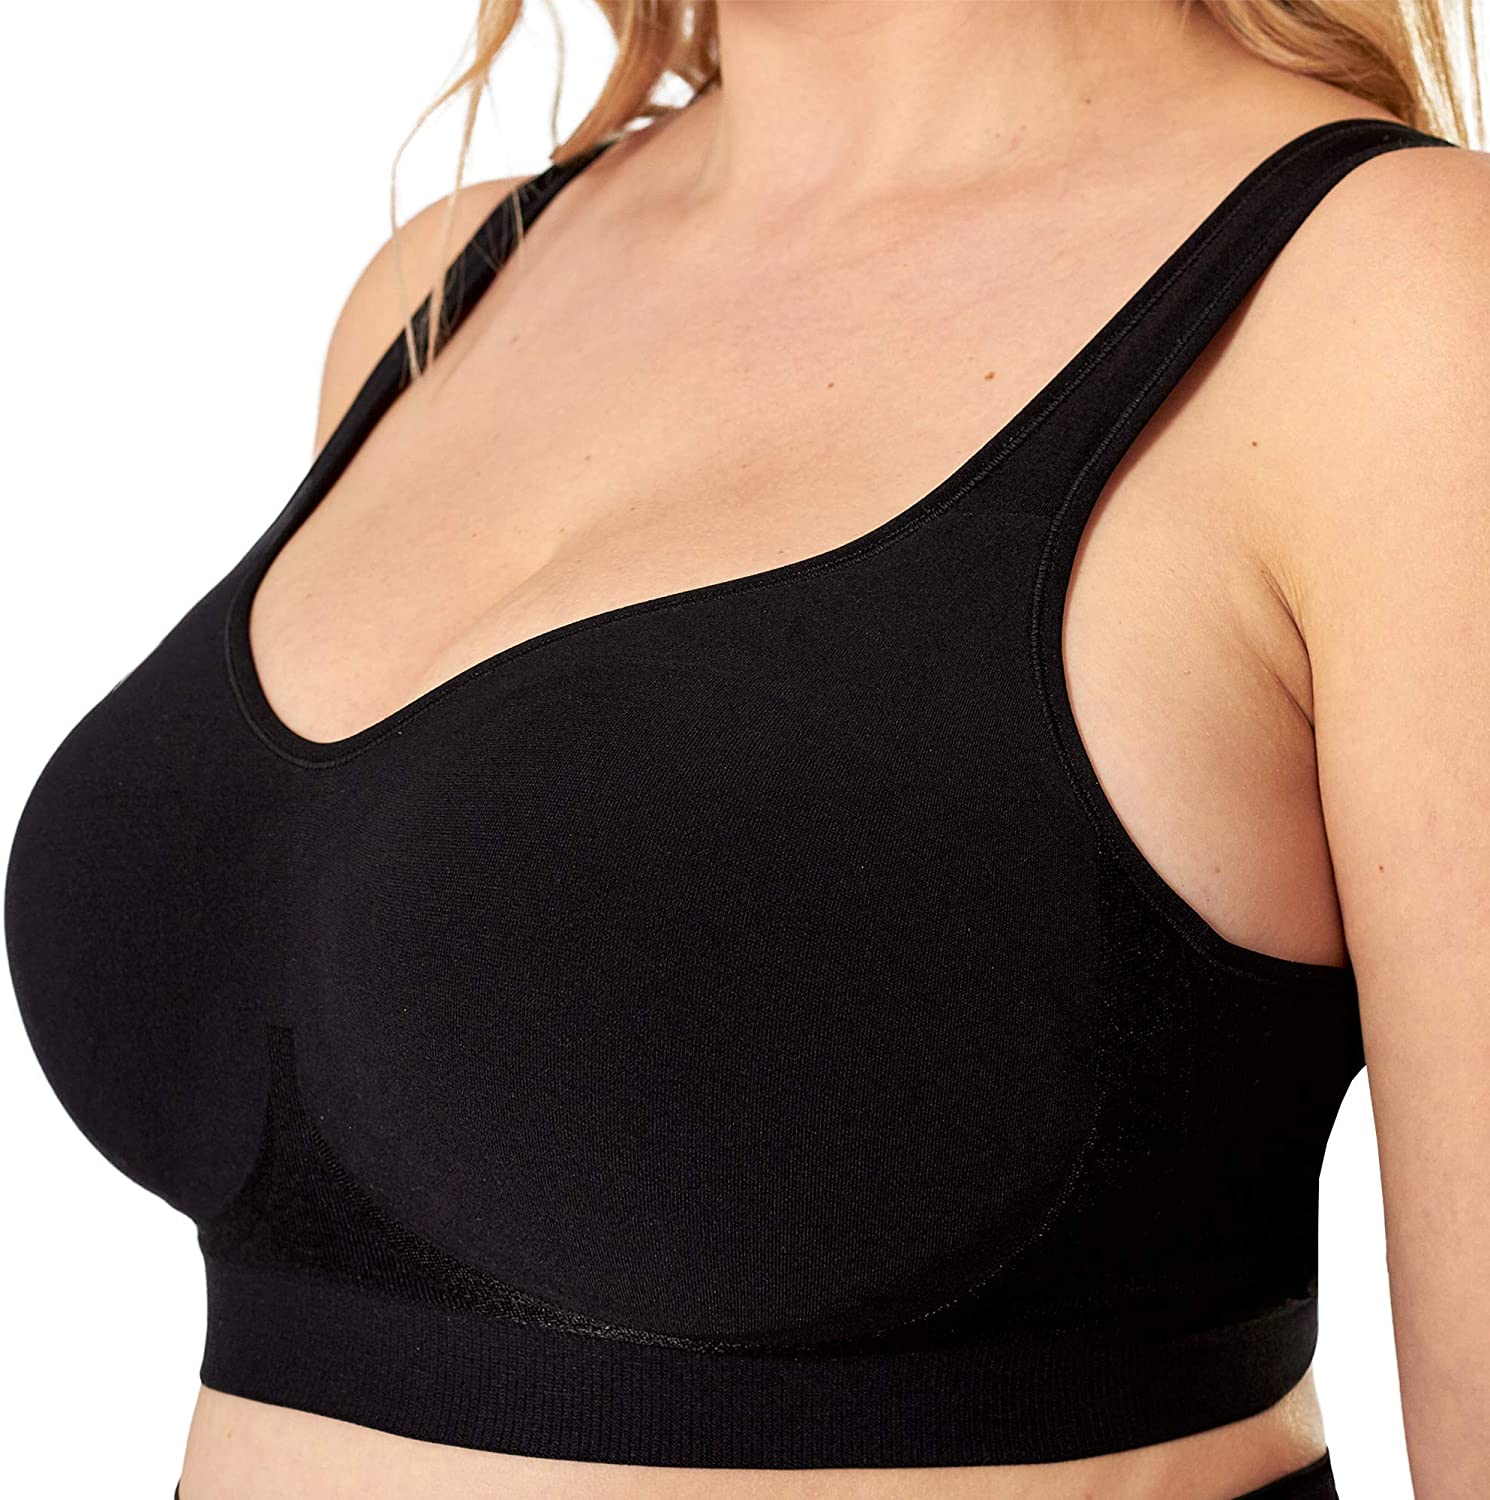 gvdentm Bras Wirefree High Support Bra for Women Small to Plus